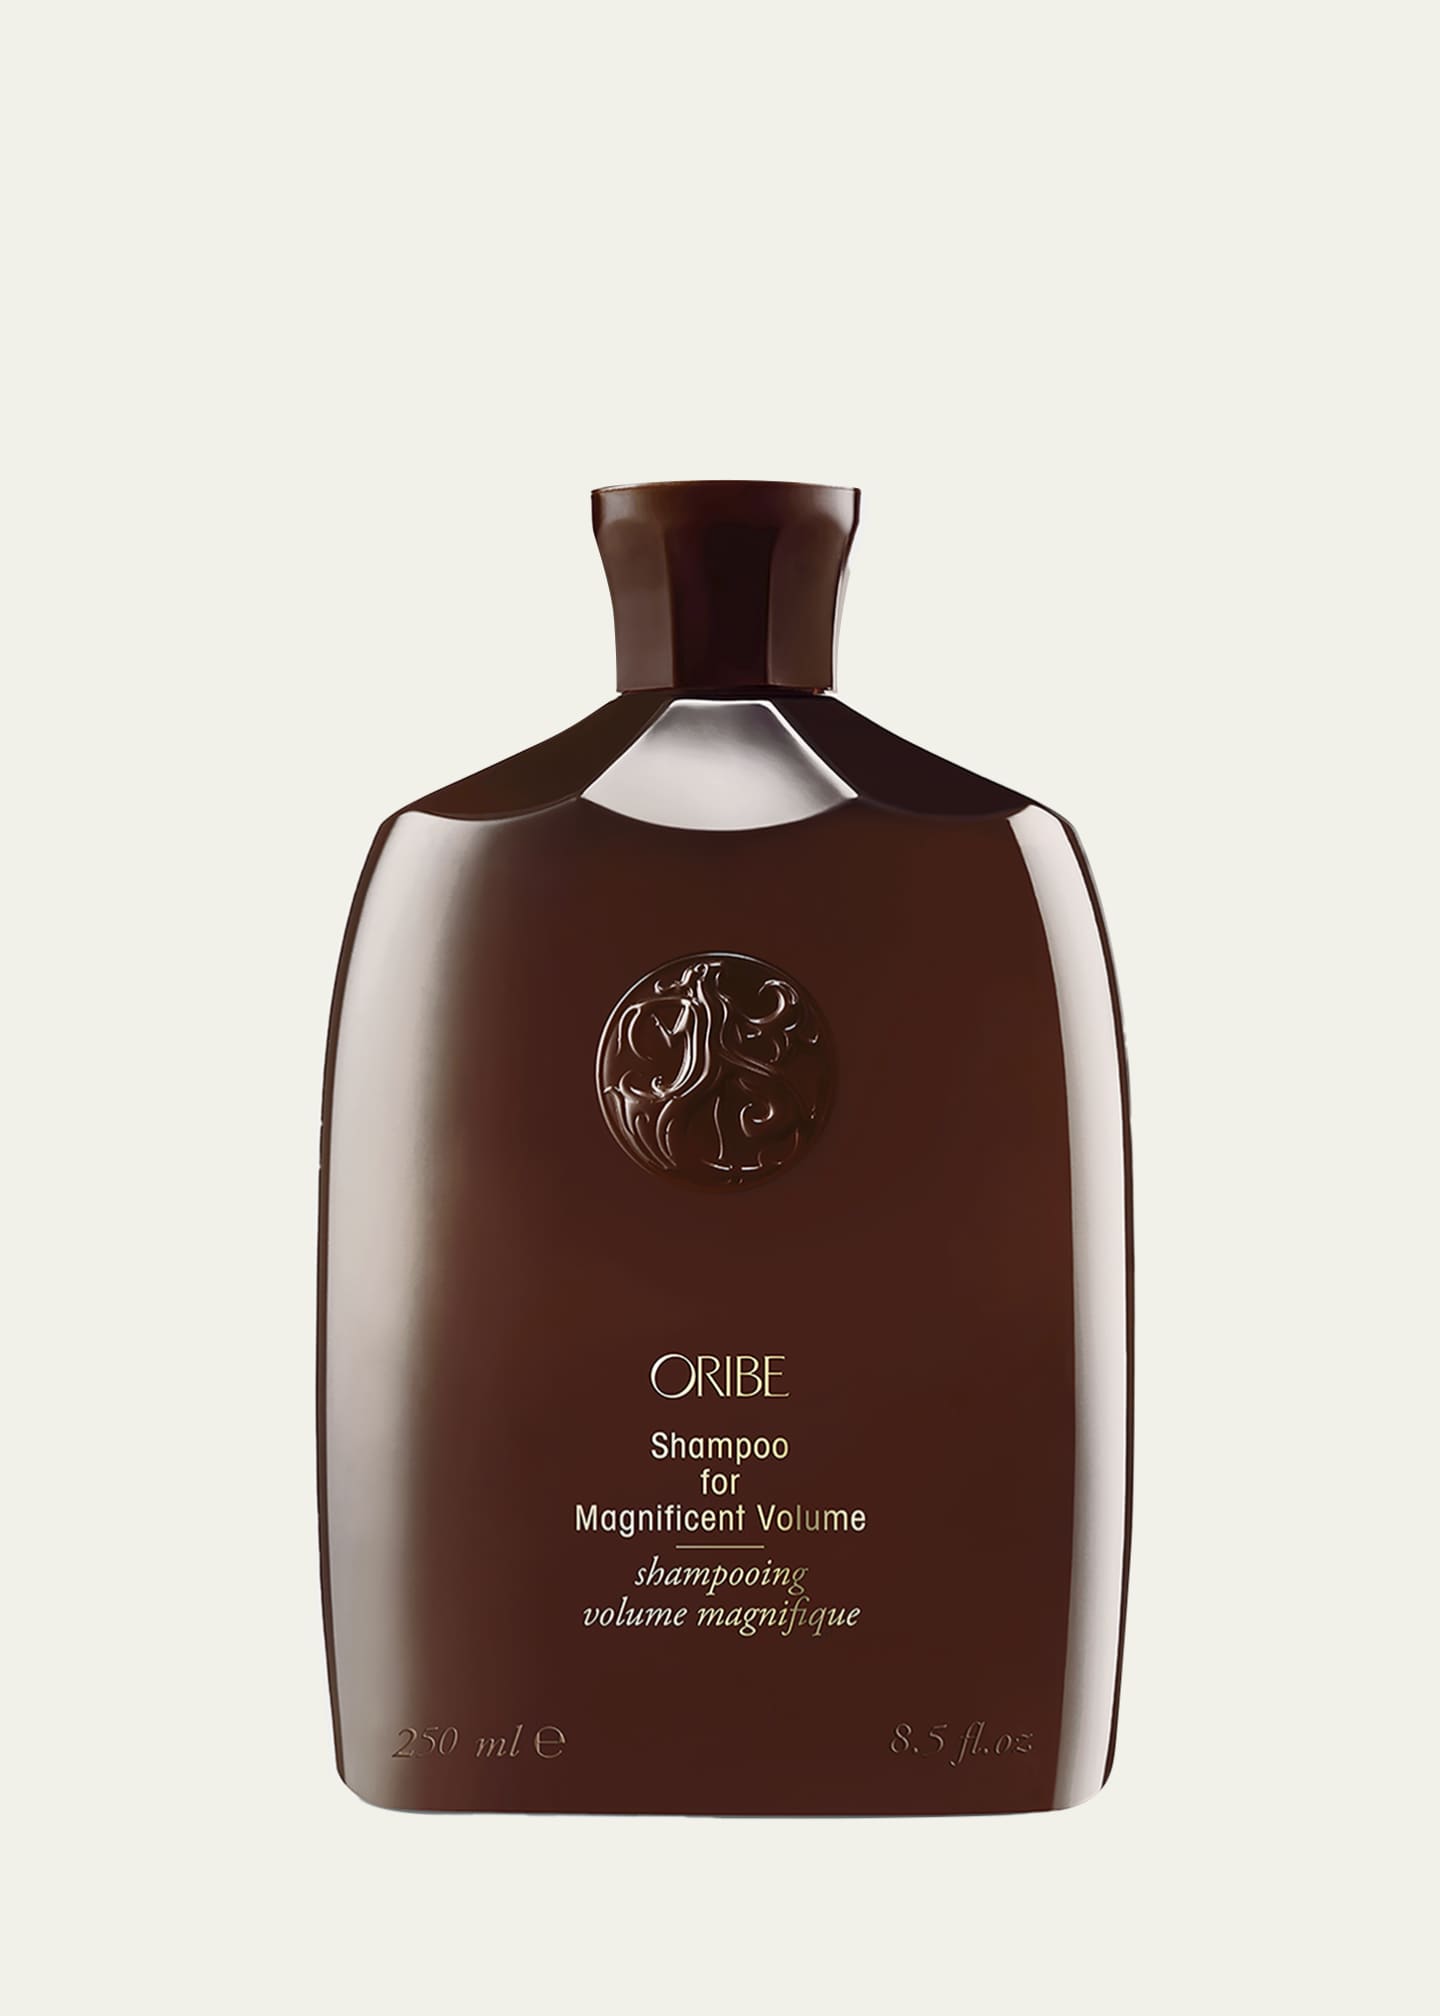 Oribe Shampoo for Magnificent Volume, 8.5 oz. Image 1 of 2